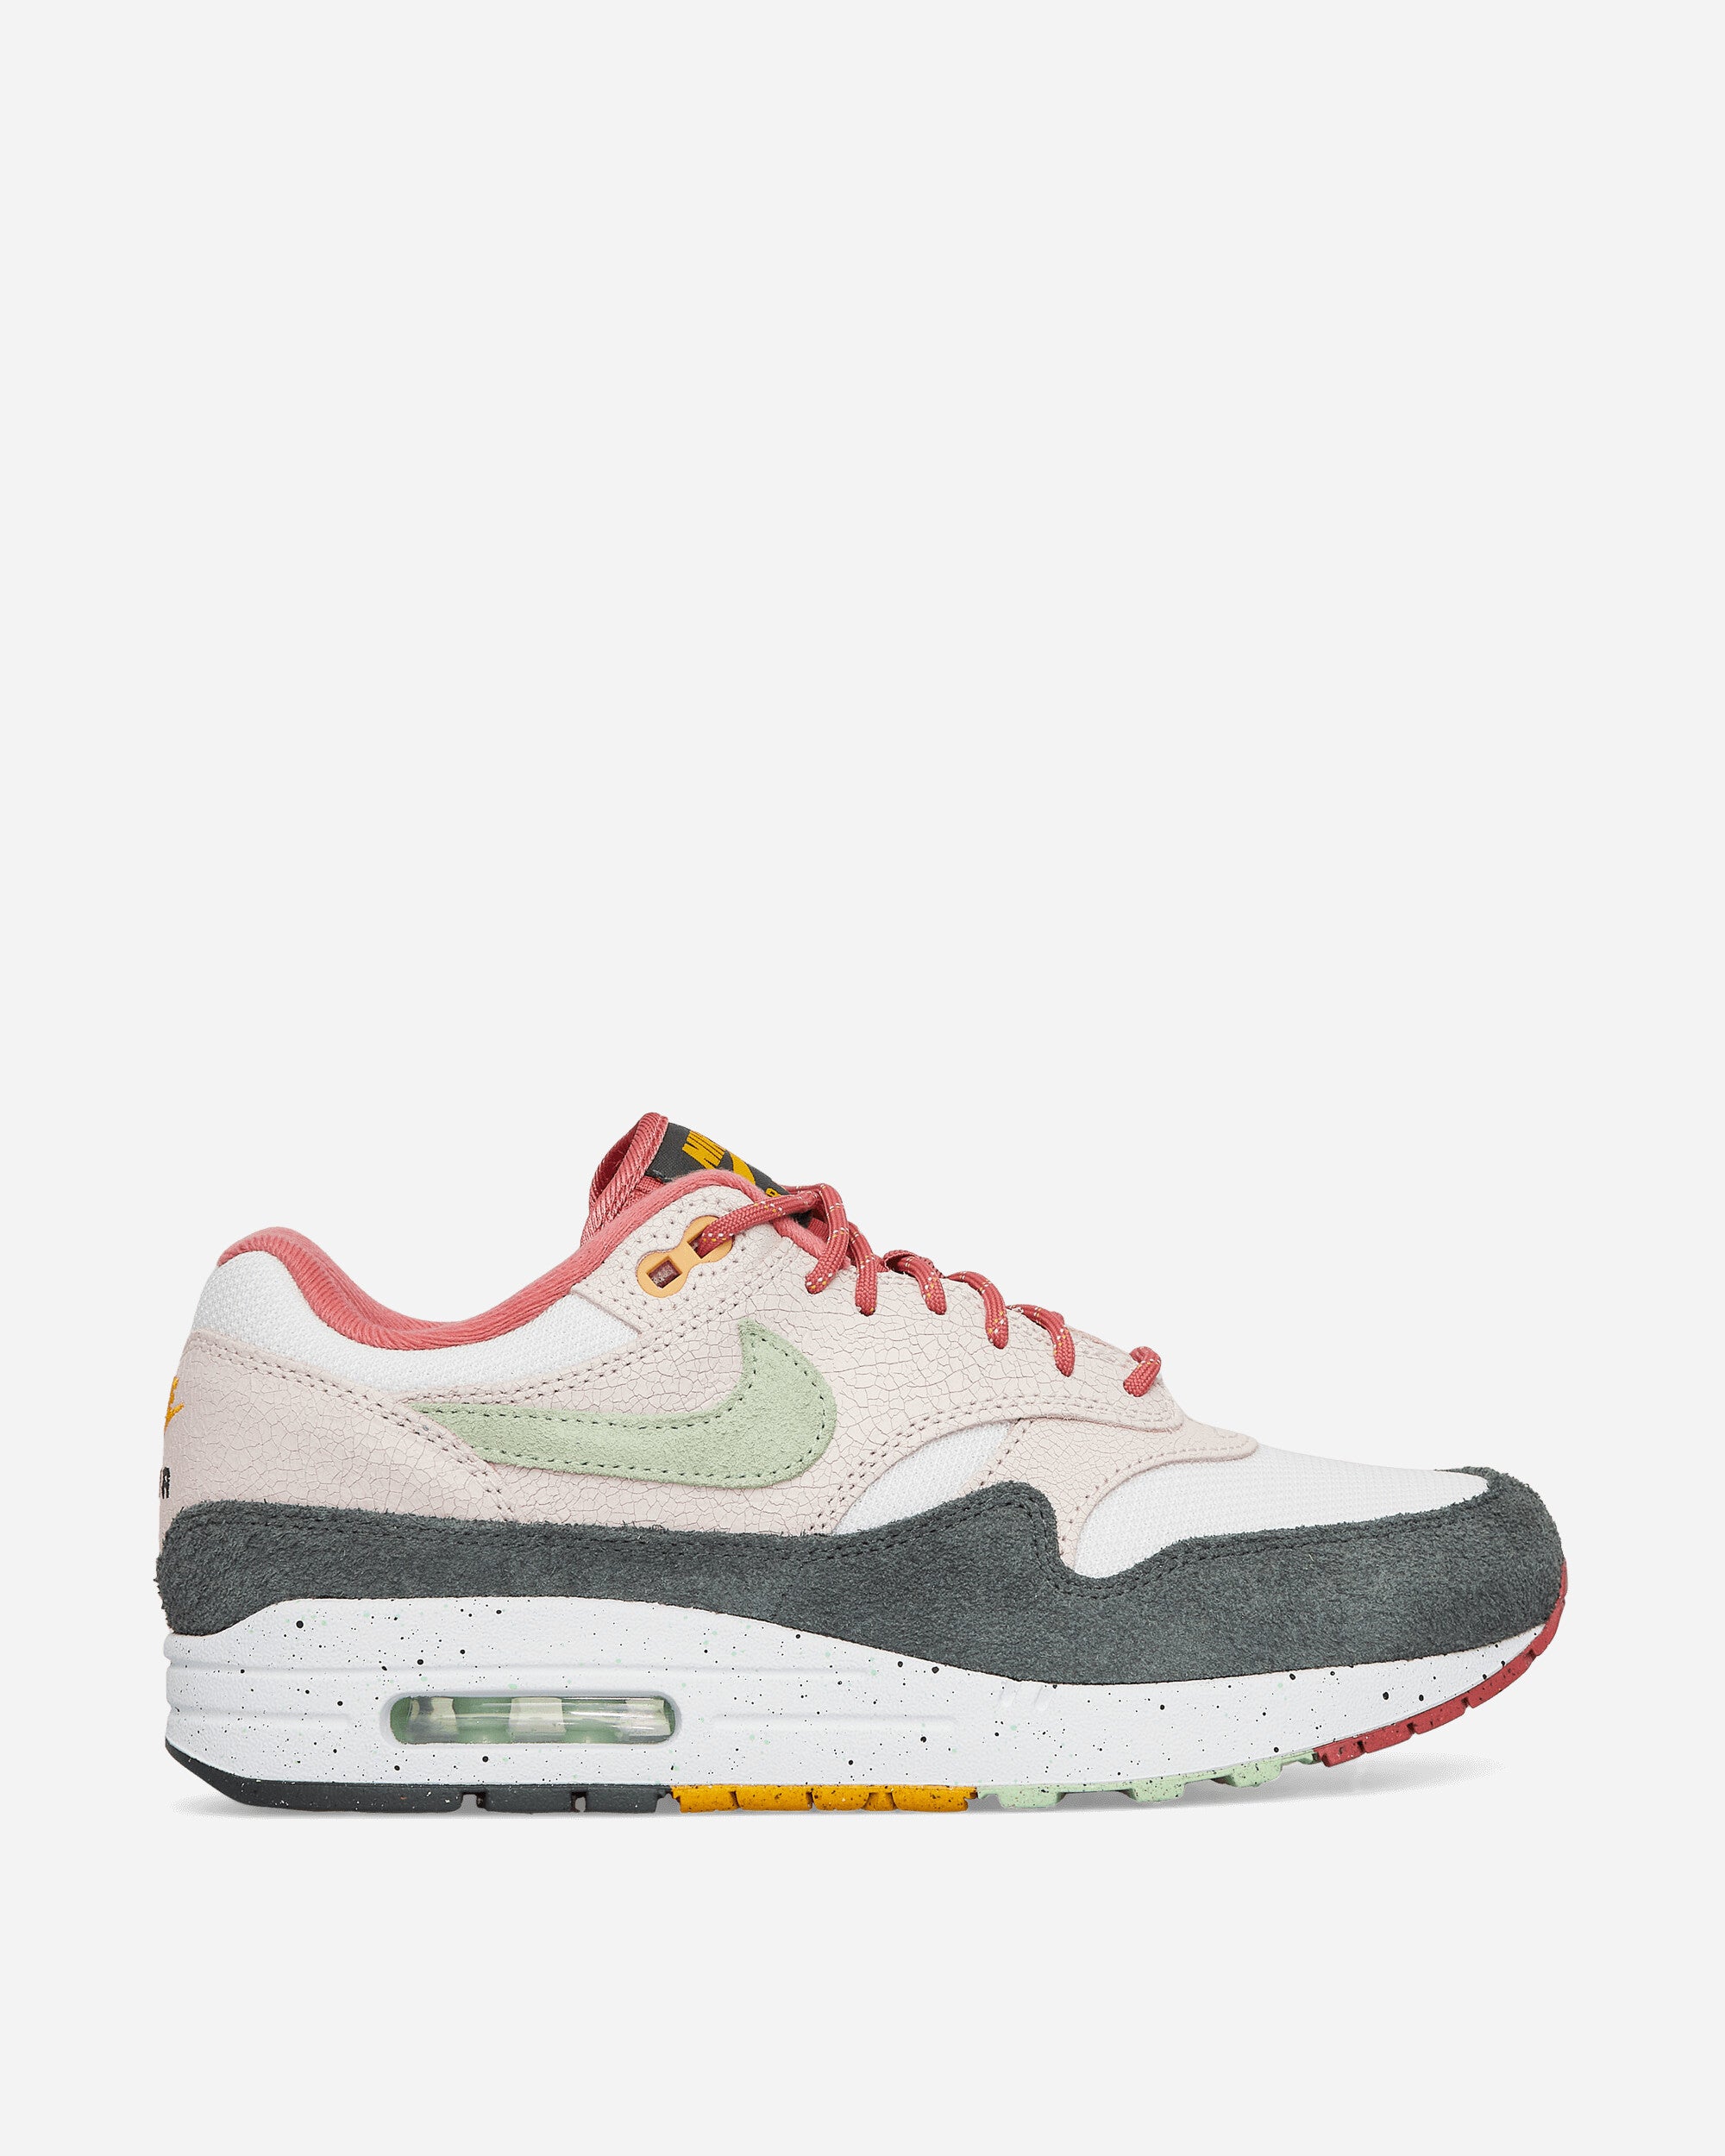 Air Max 1 Sneakers Light Soft Pink